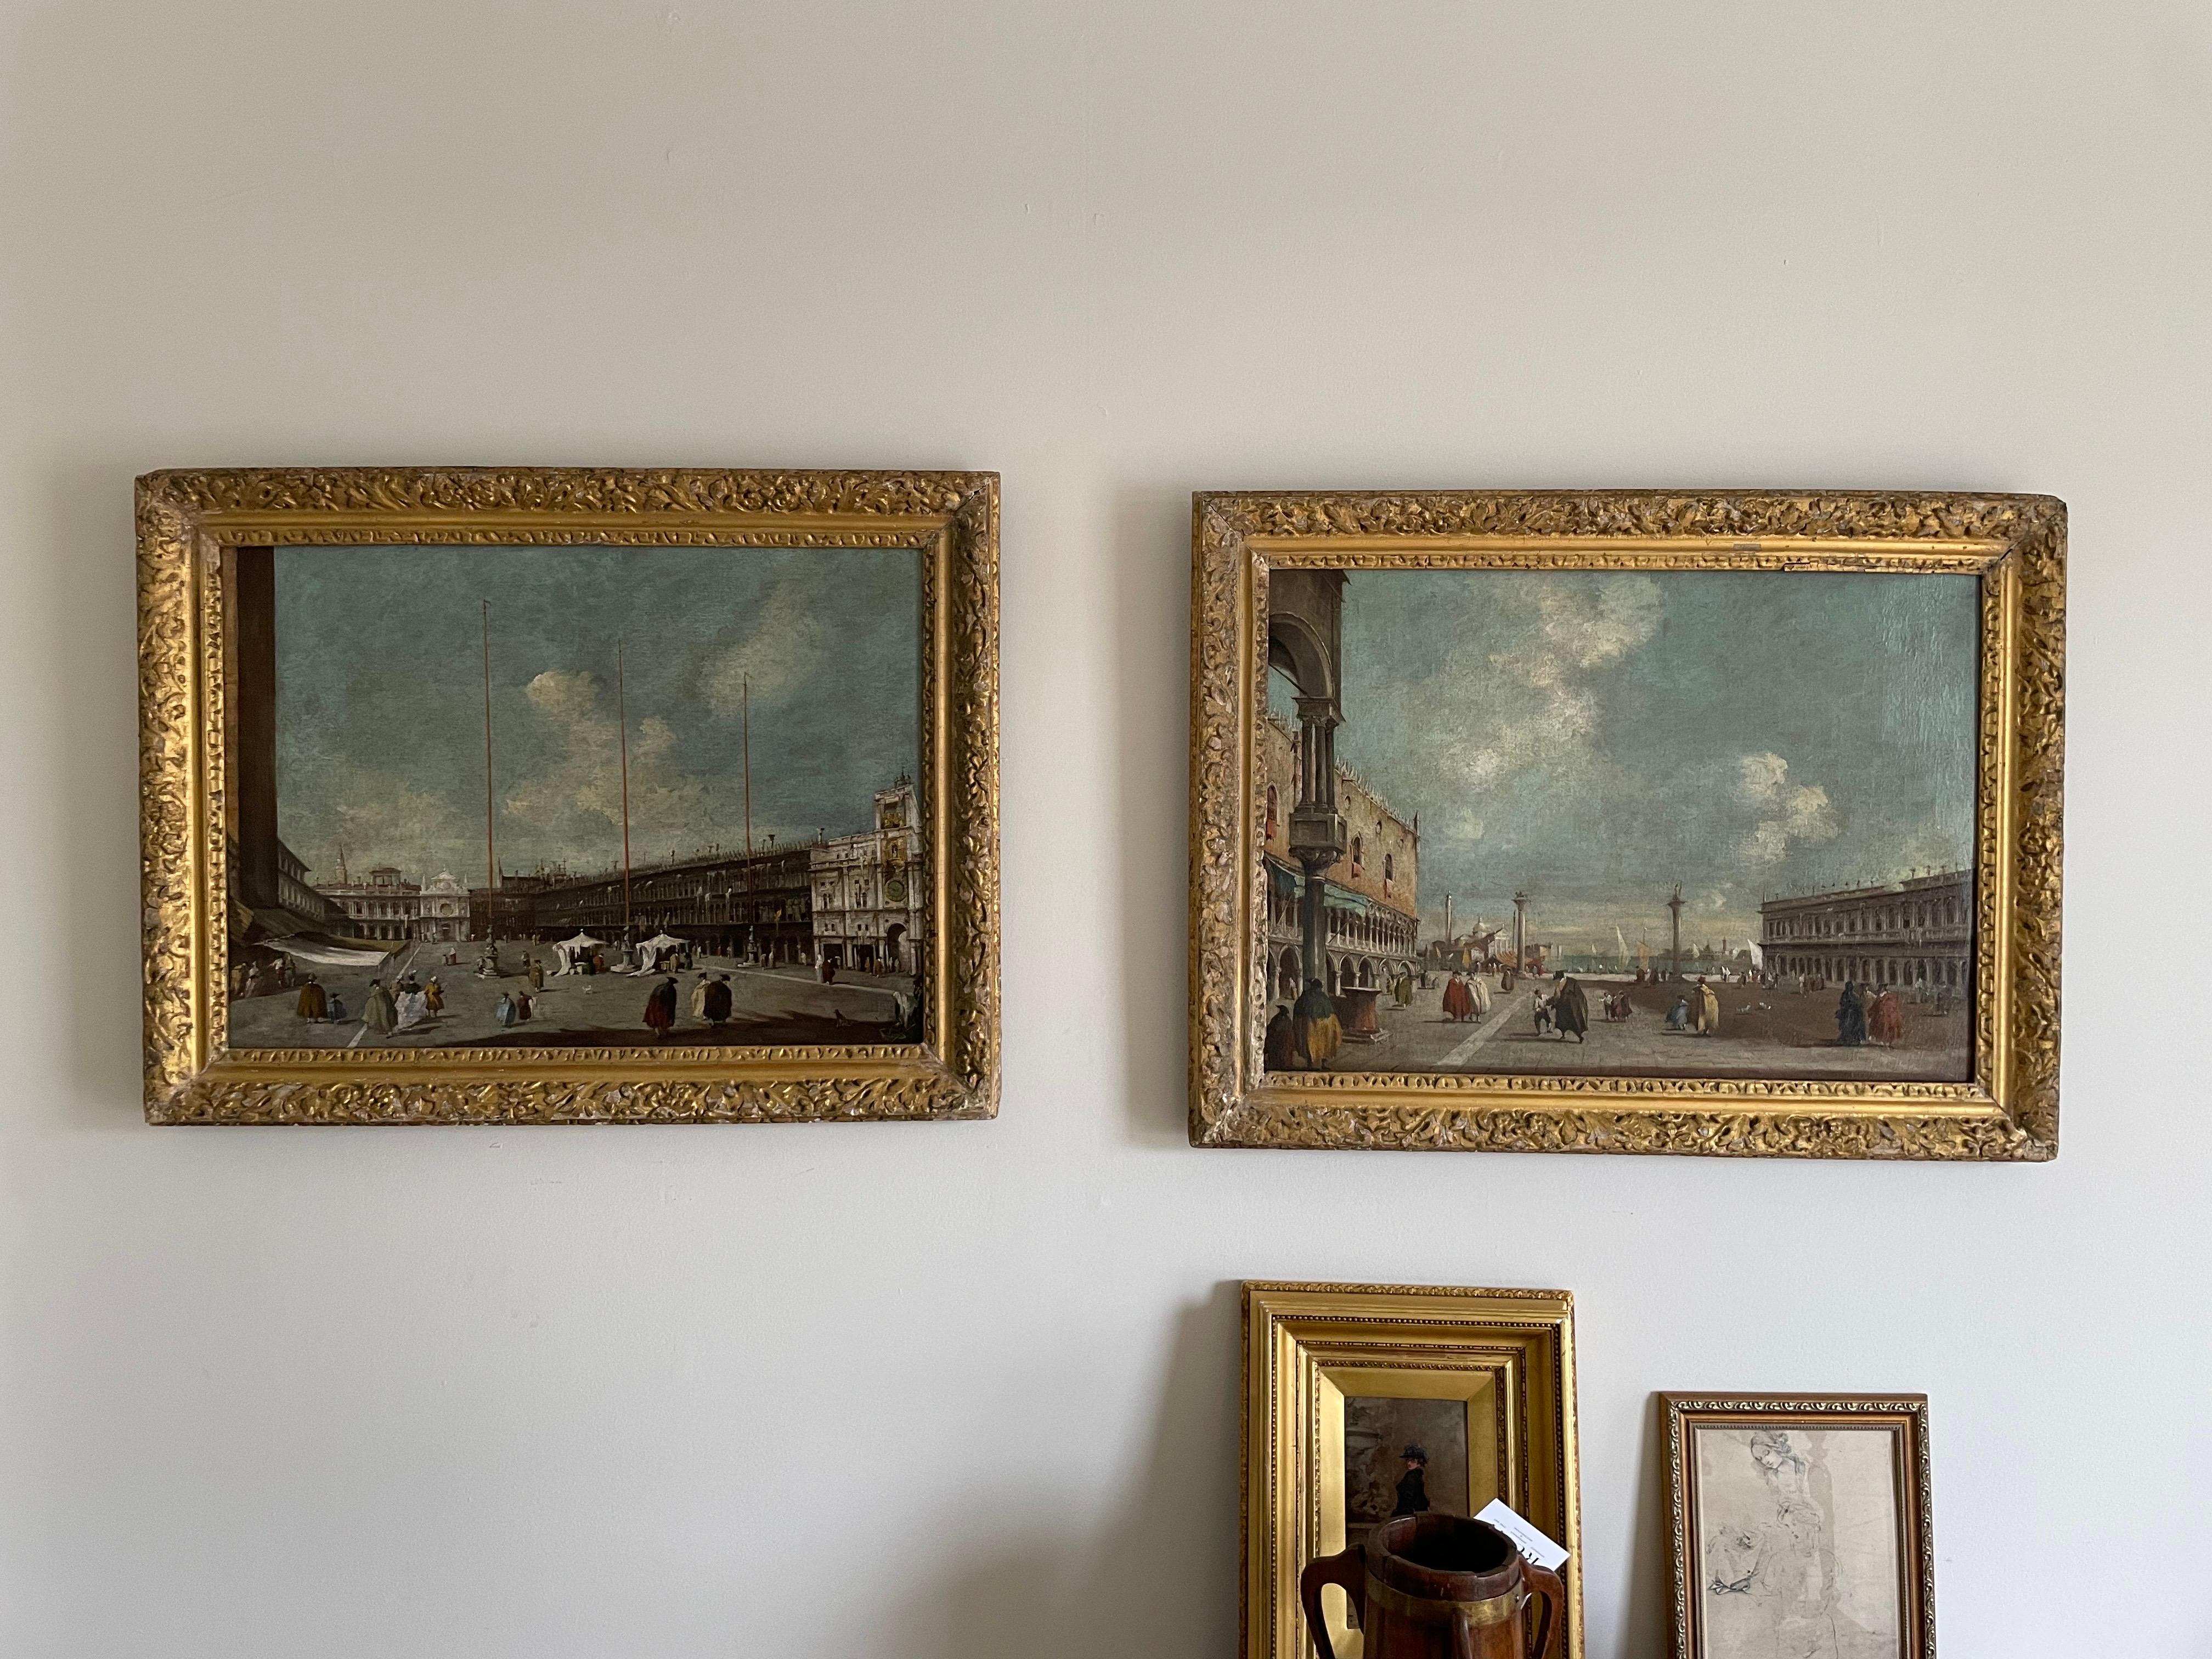 Highly desirable pair of oil on canvases 
Italian Venetian Scenes
Manner of Francesco Guardi
Venice, a view of St. Mark's Square towards San Geminiano & 
Venice, a view of the Piazzetta towards San Giorgio Maggiore

Unframed 